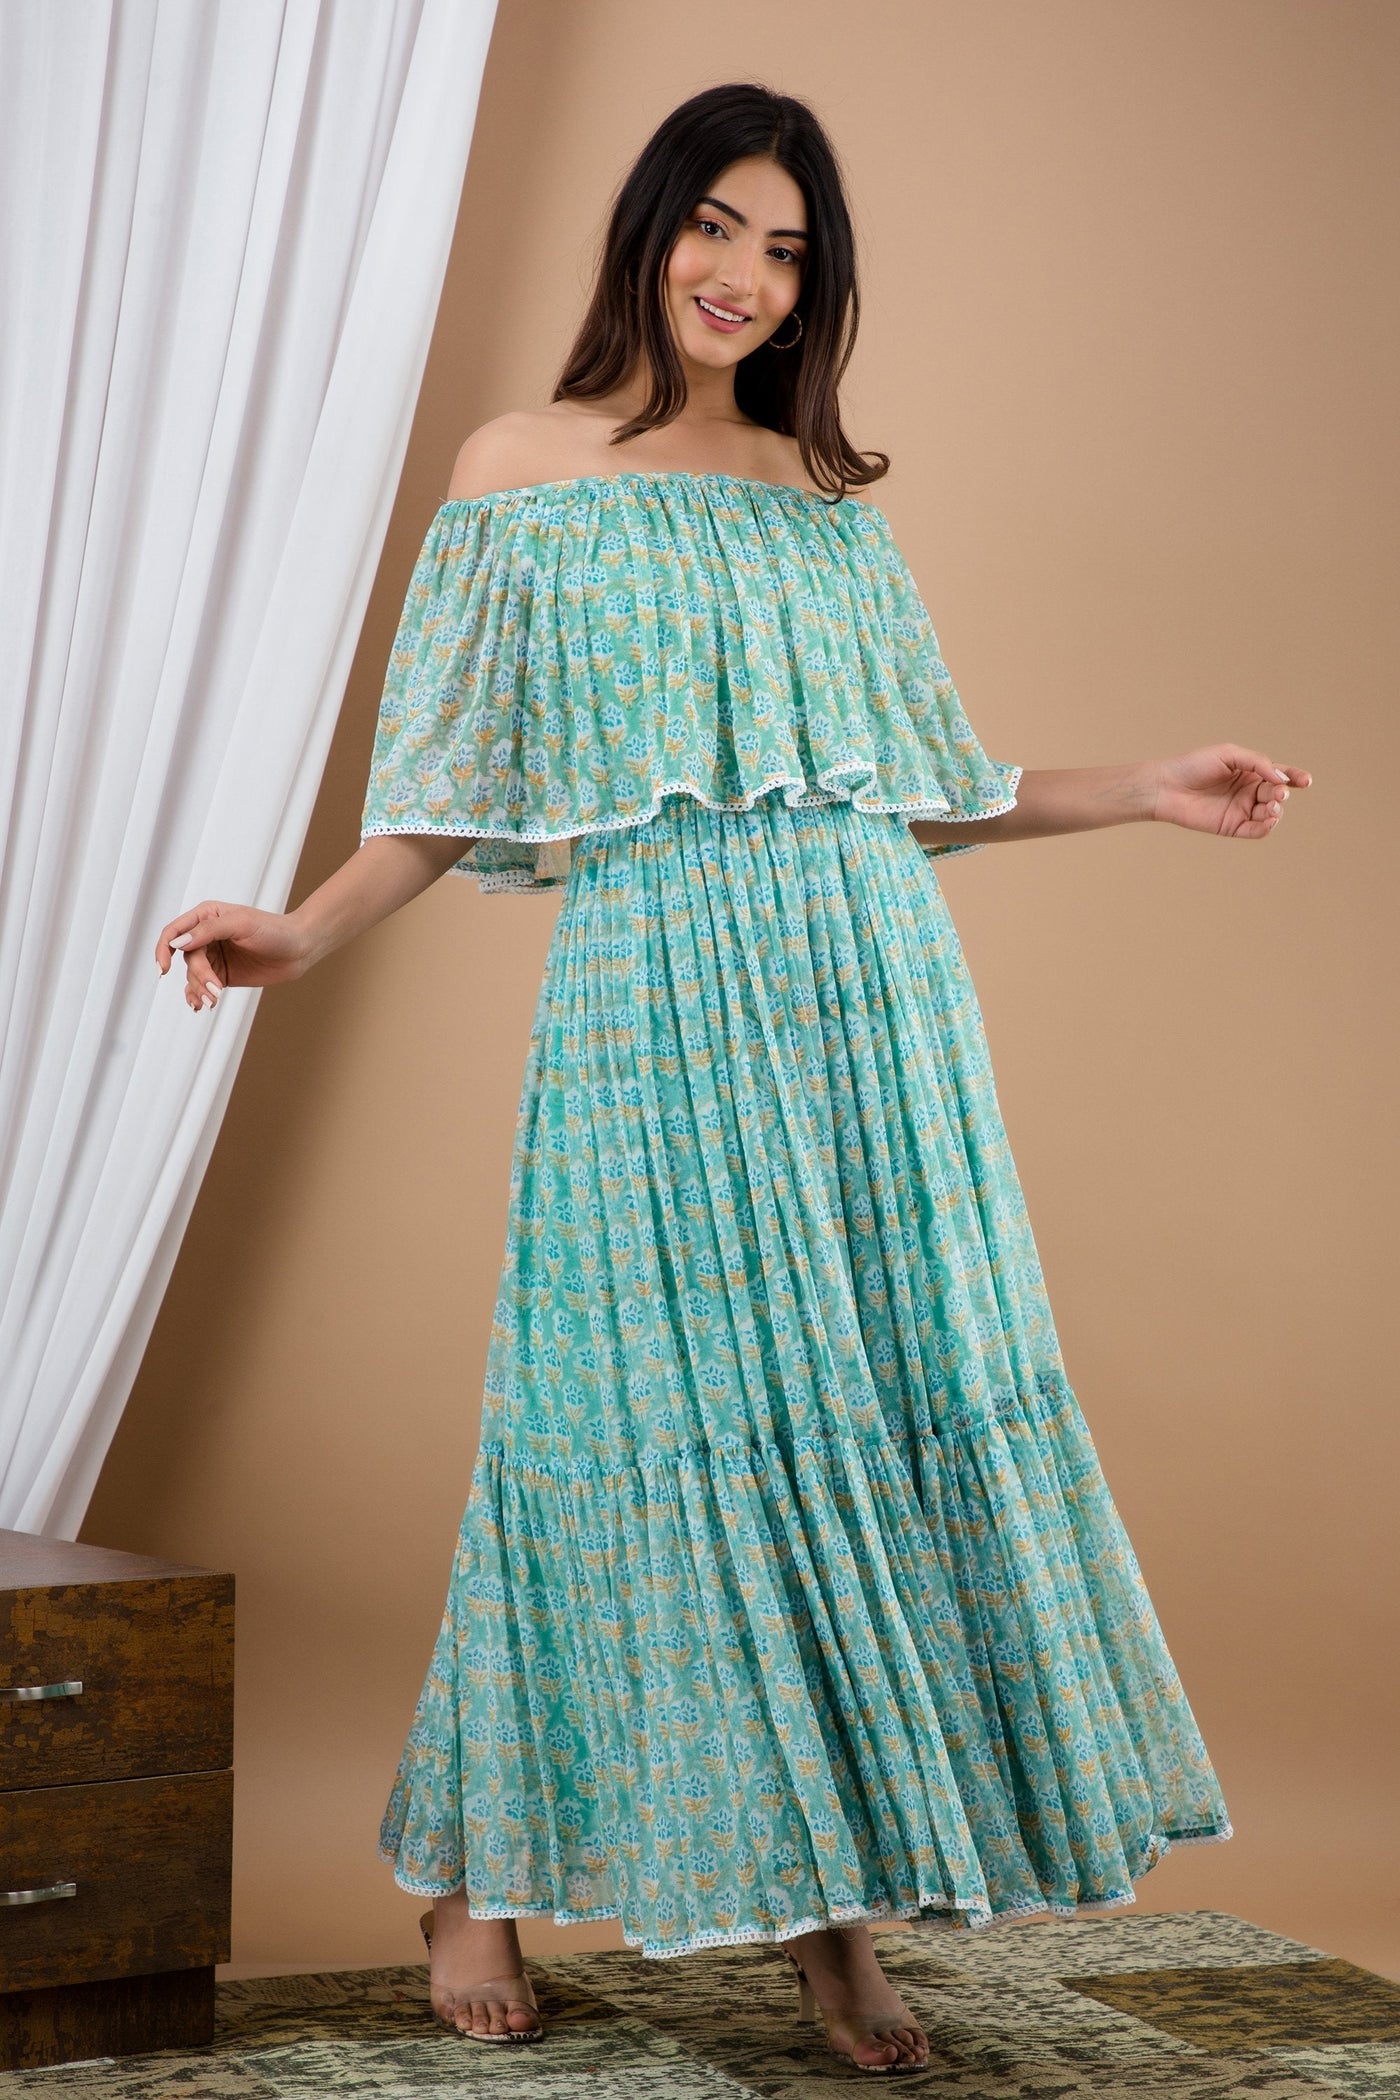 Women's Sea Green Off Shoulder Maxi Dress by SARAS THE LABEL (1 Pc Set)